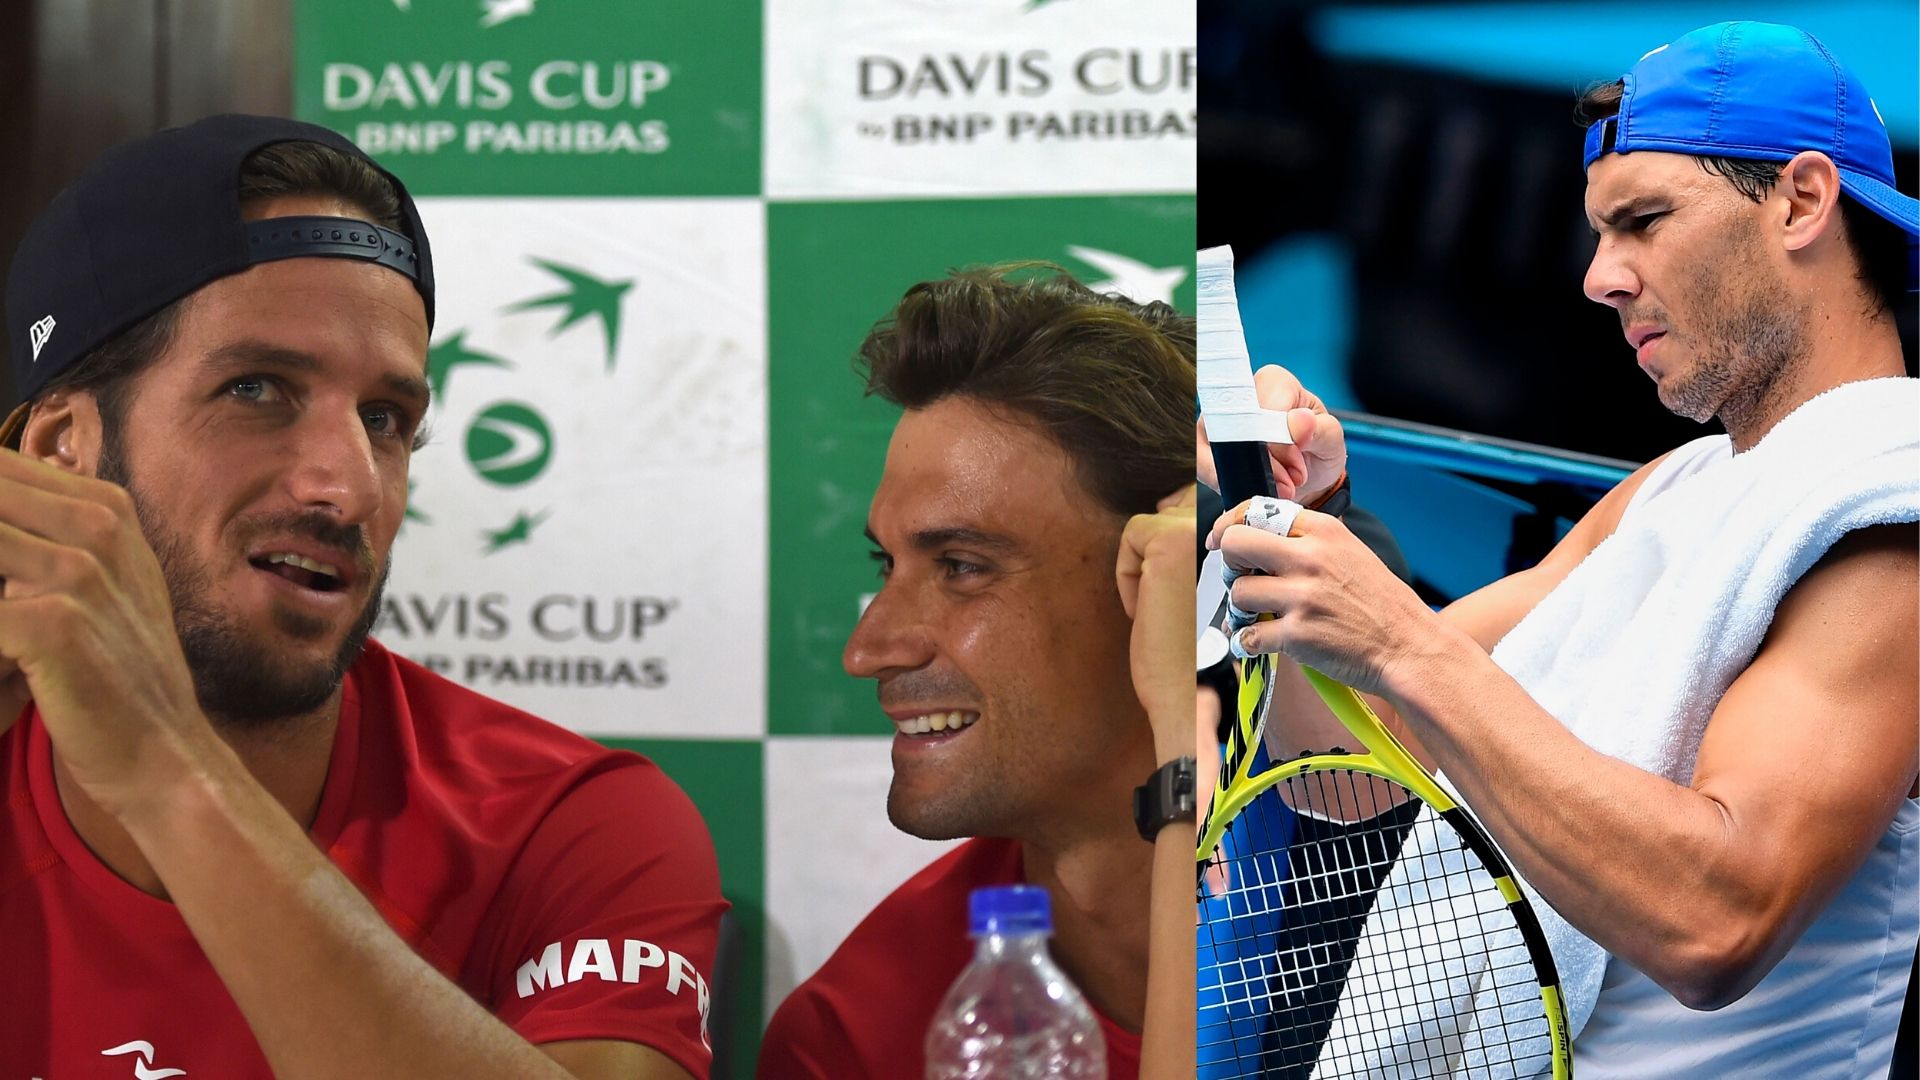 Feliciano Lopez and David Ferrer spoke about Rafael Nadal and his mentality